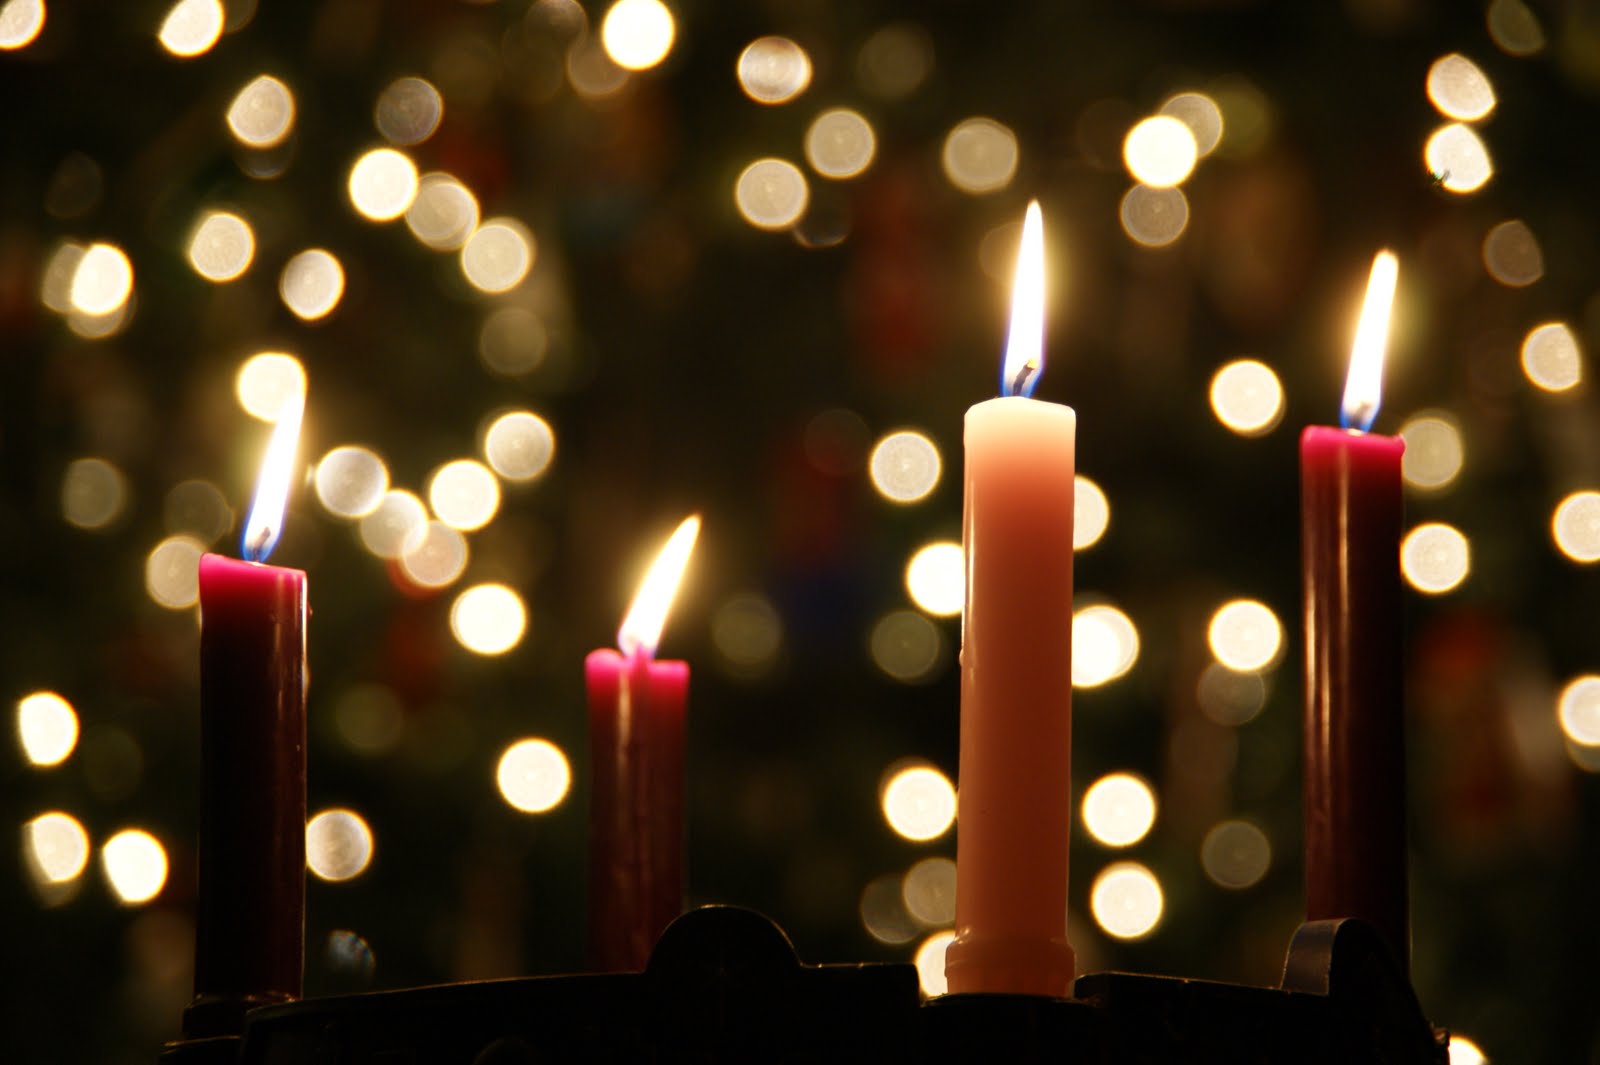 ADVENT SEASON: An Inter-face between the Coming and the Waiting